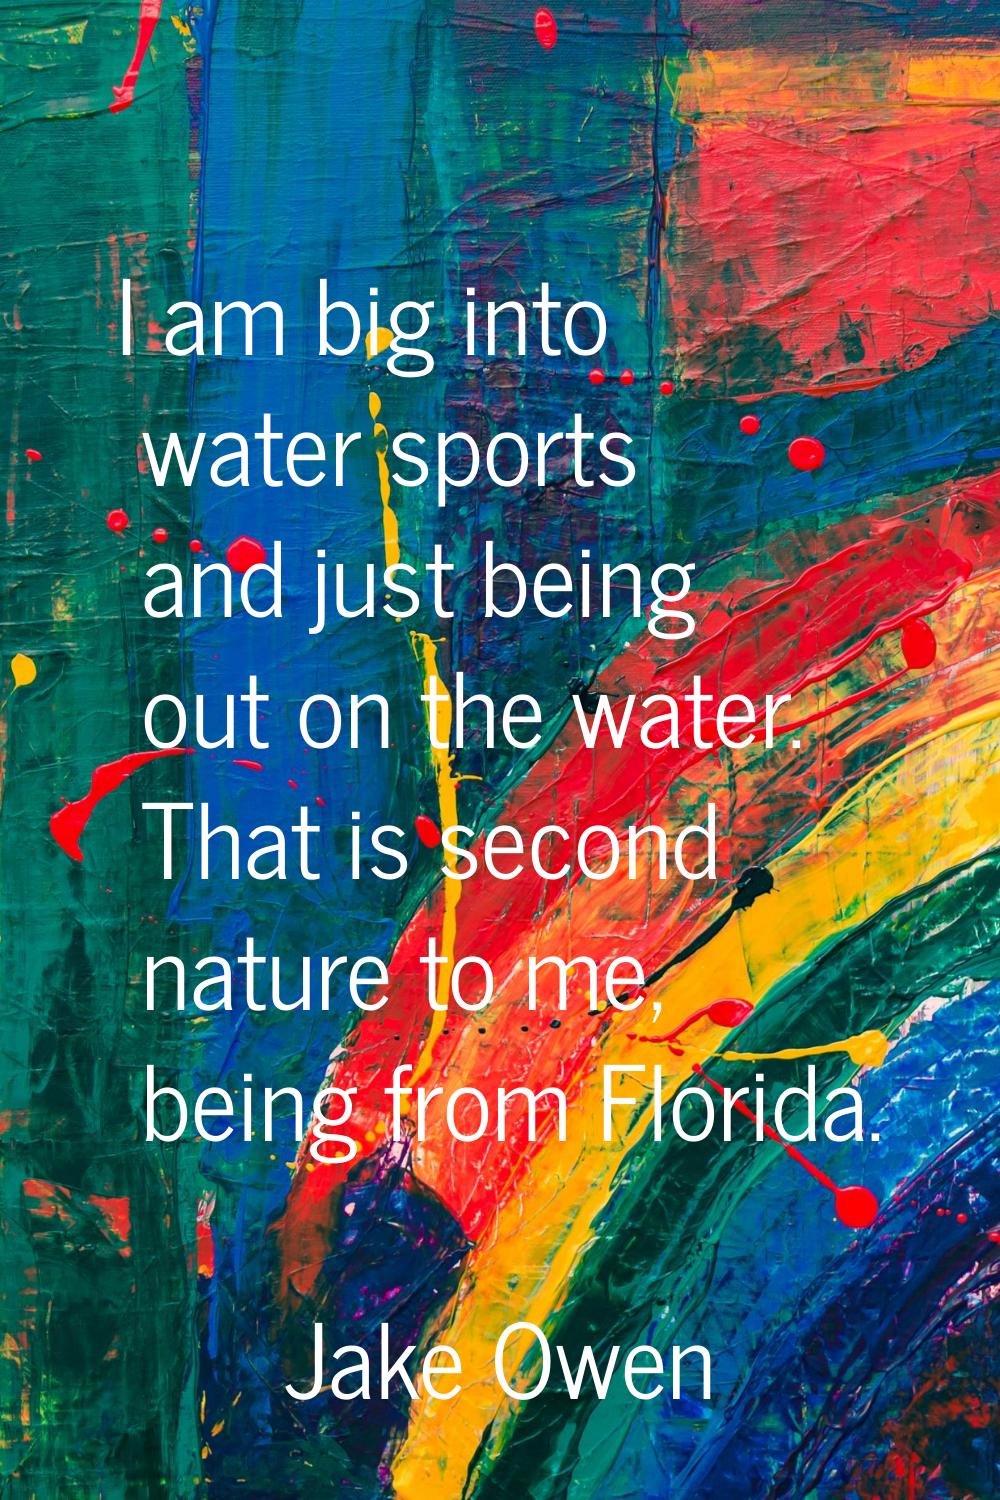 I am big into water sports and just being out on the water. That is second nature to me, being from